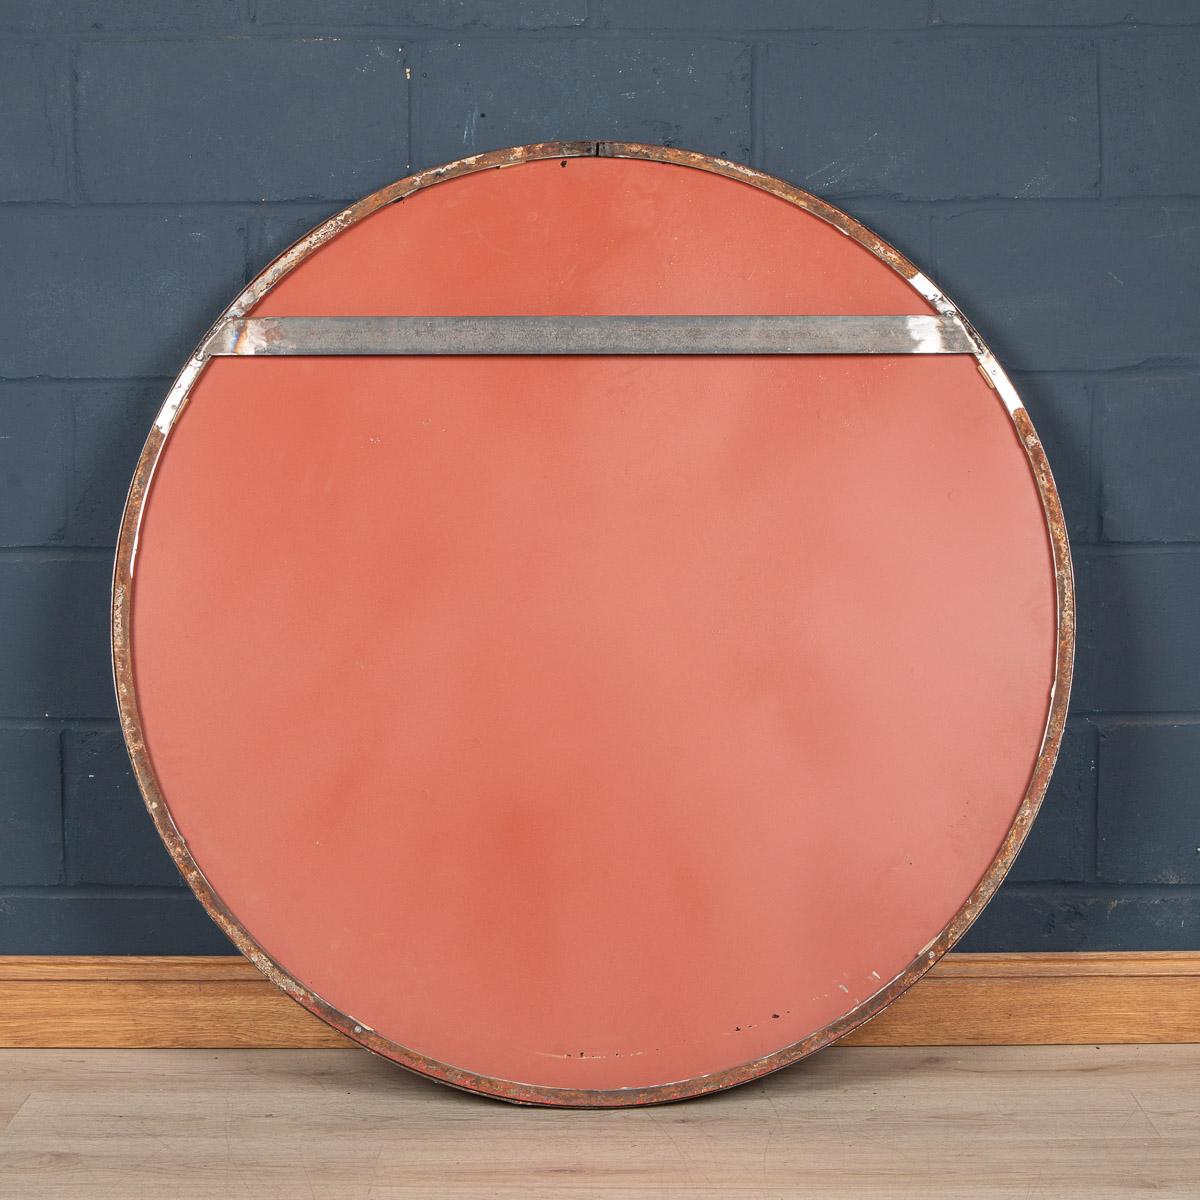 20th Century Large Convex Railway Mirror, Czechoslovakia In Good Condition For Sale In Royal Tunbridge Wells, Kent